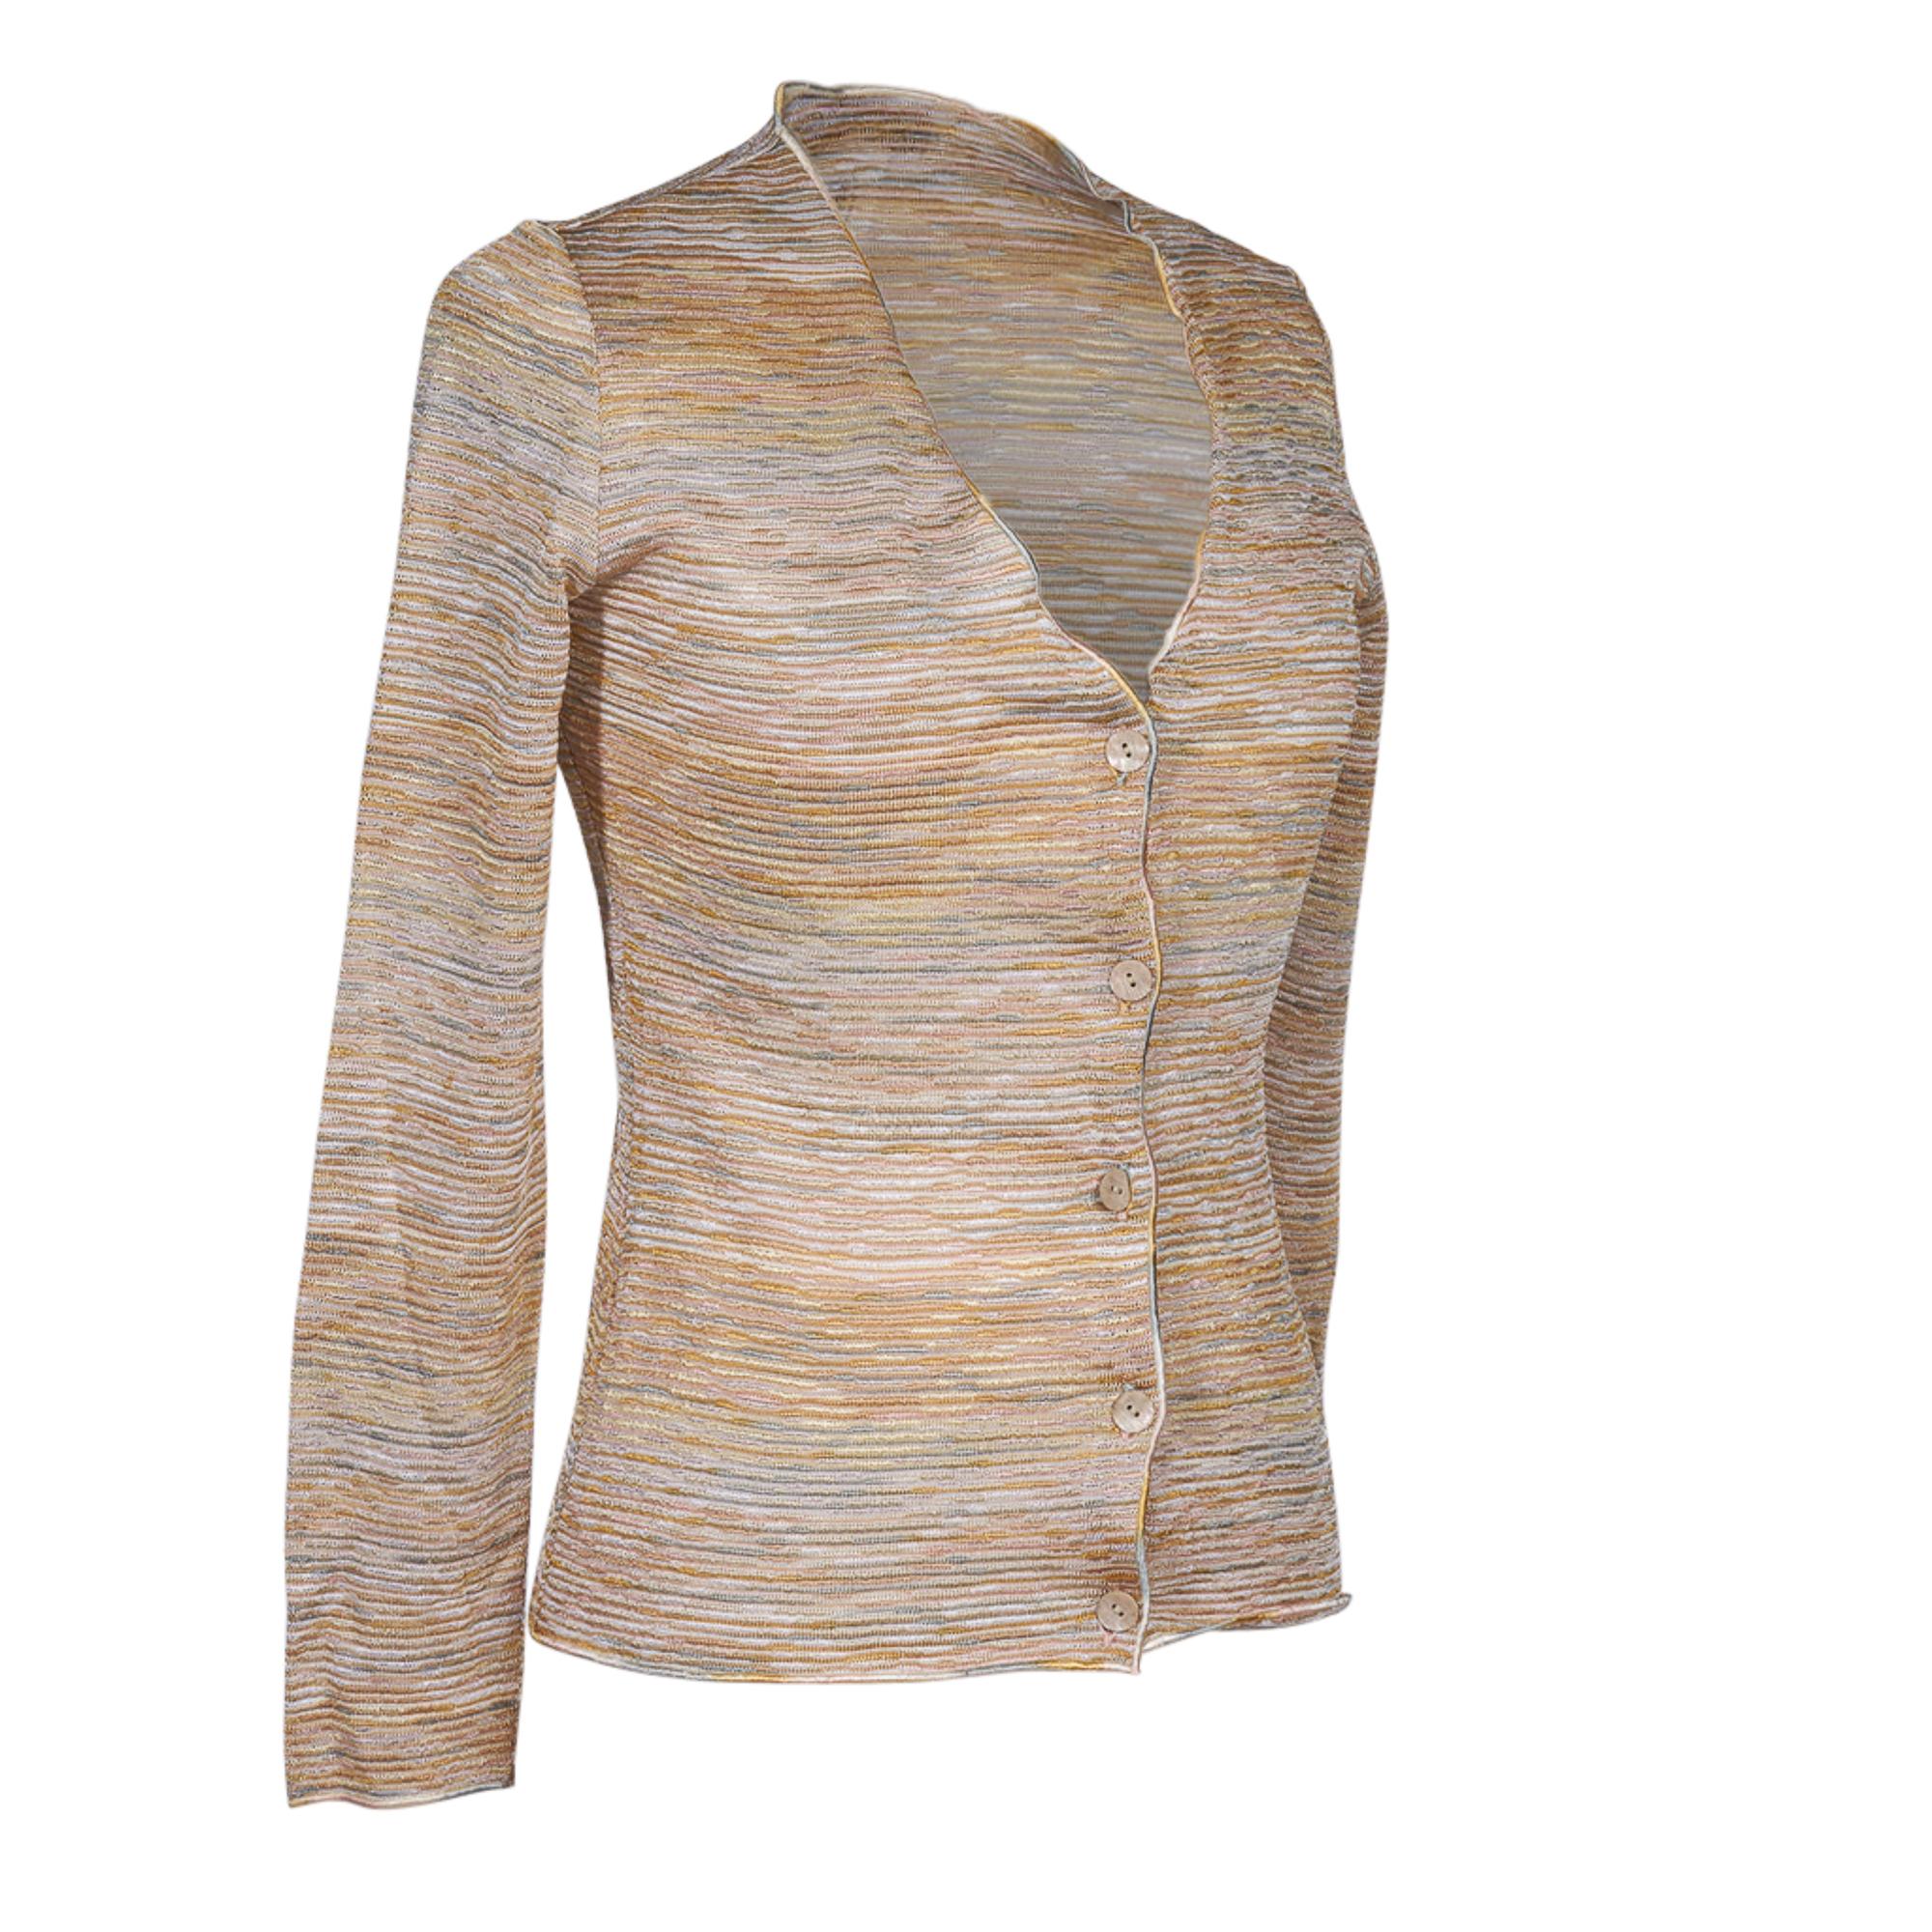 Guaranteed authentic Missoni  terrific dress with matching cardigan.  
Wearable design in pastel soft colours makes this dress  timeless. 
Classic Missoni knit in beautiful hues of blue gray, sunkissed orange and yellow, pink, caramel and nude. 